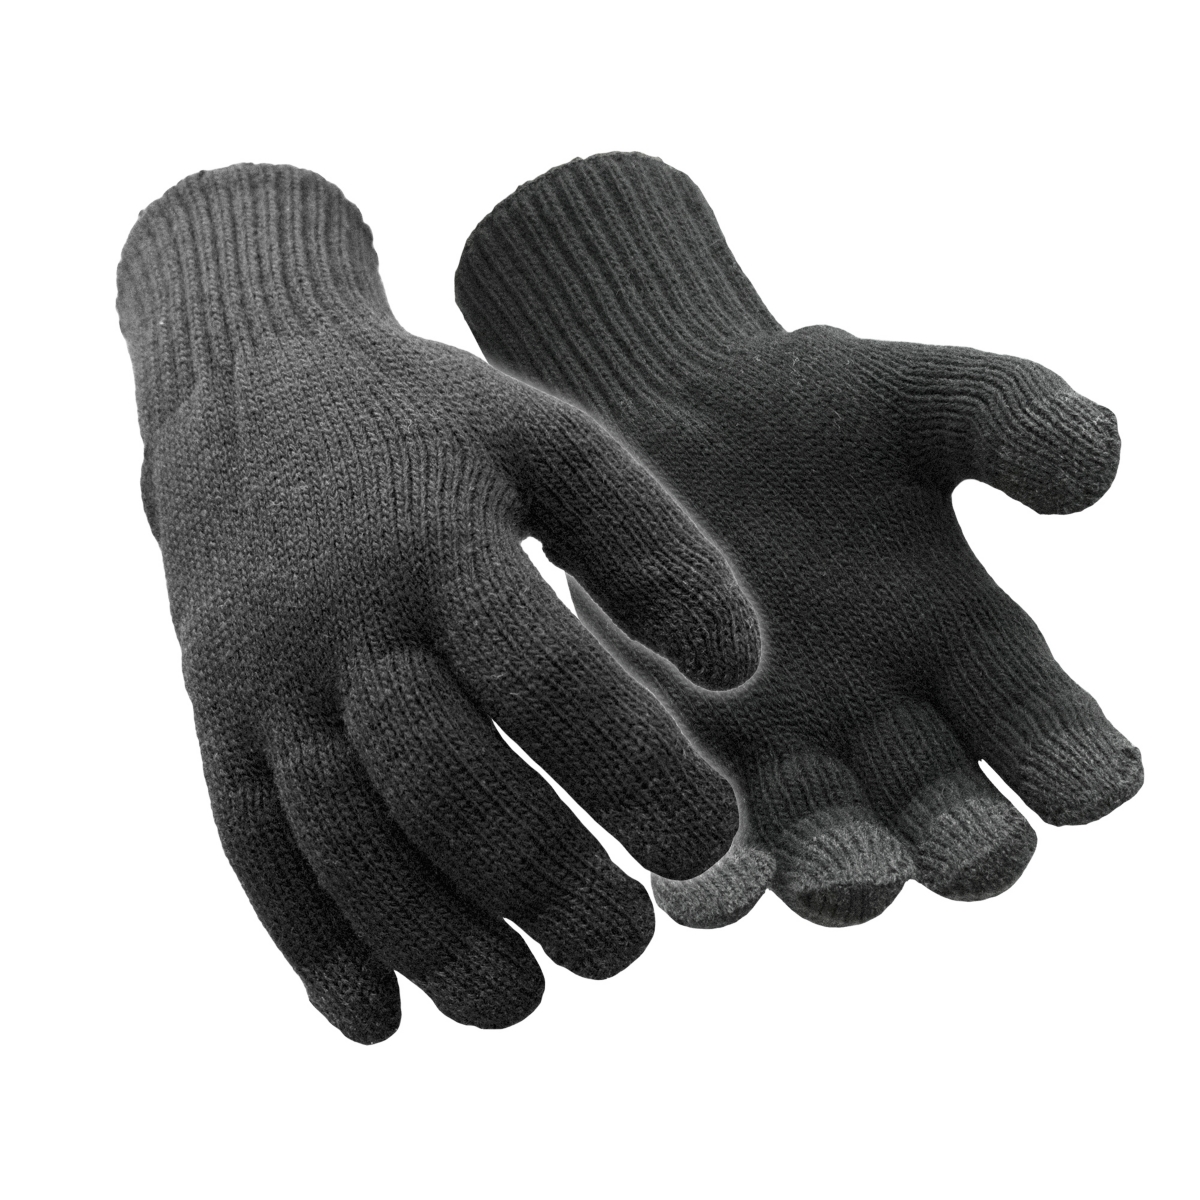 Men's Warm Dual Layer Thermal Lined Touchscreen Compatible Gloves - Black